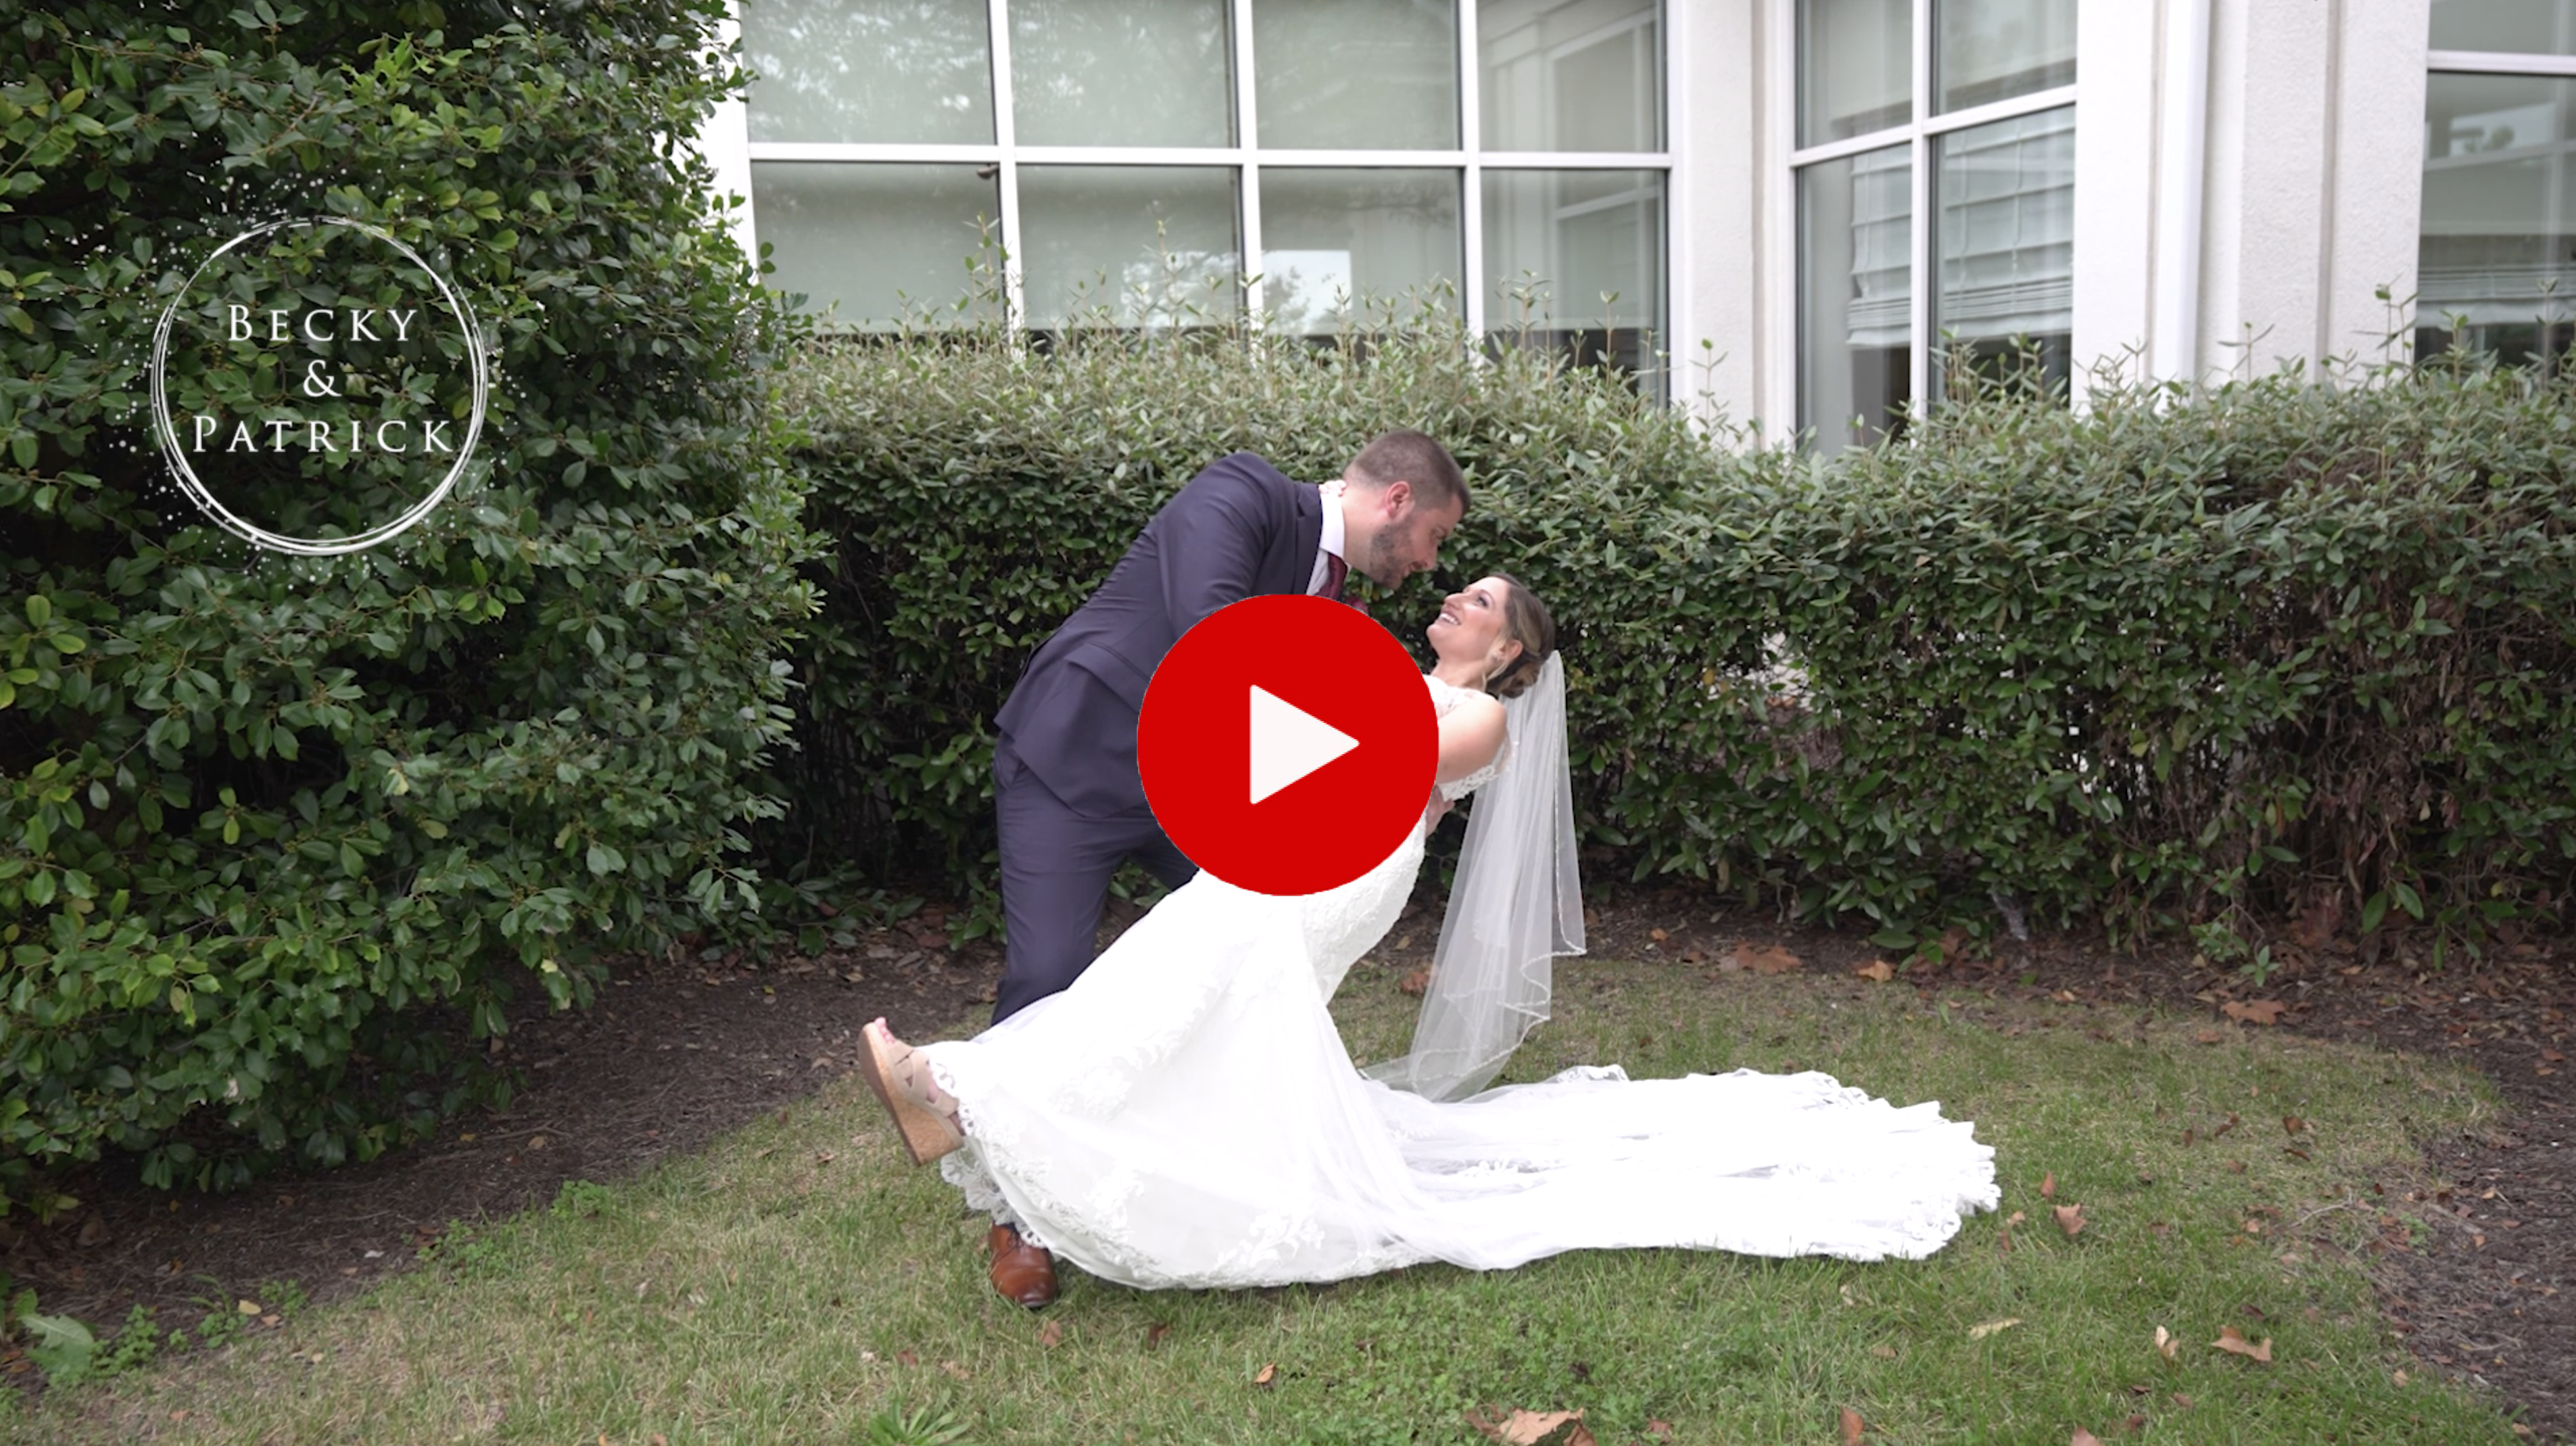 Rebecca and Patrick | Highlight Video Reel | The Bayfront Club | Baltimore Wedding Photographer | Trans4mation Photography